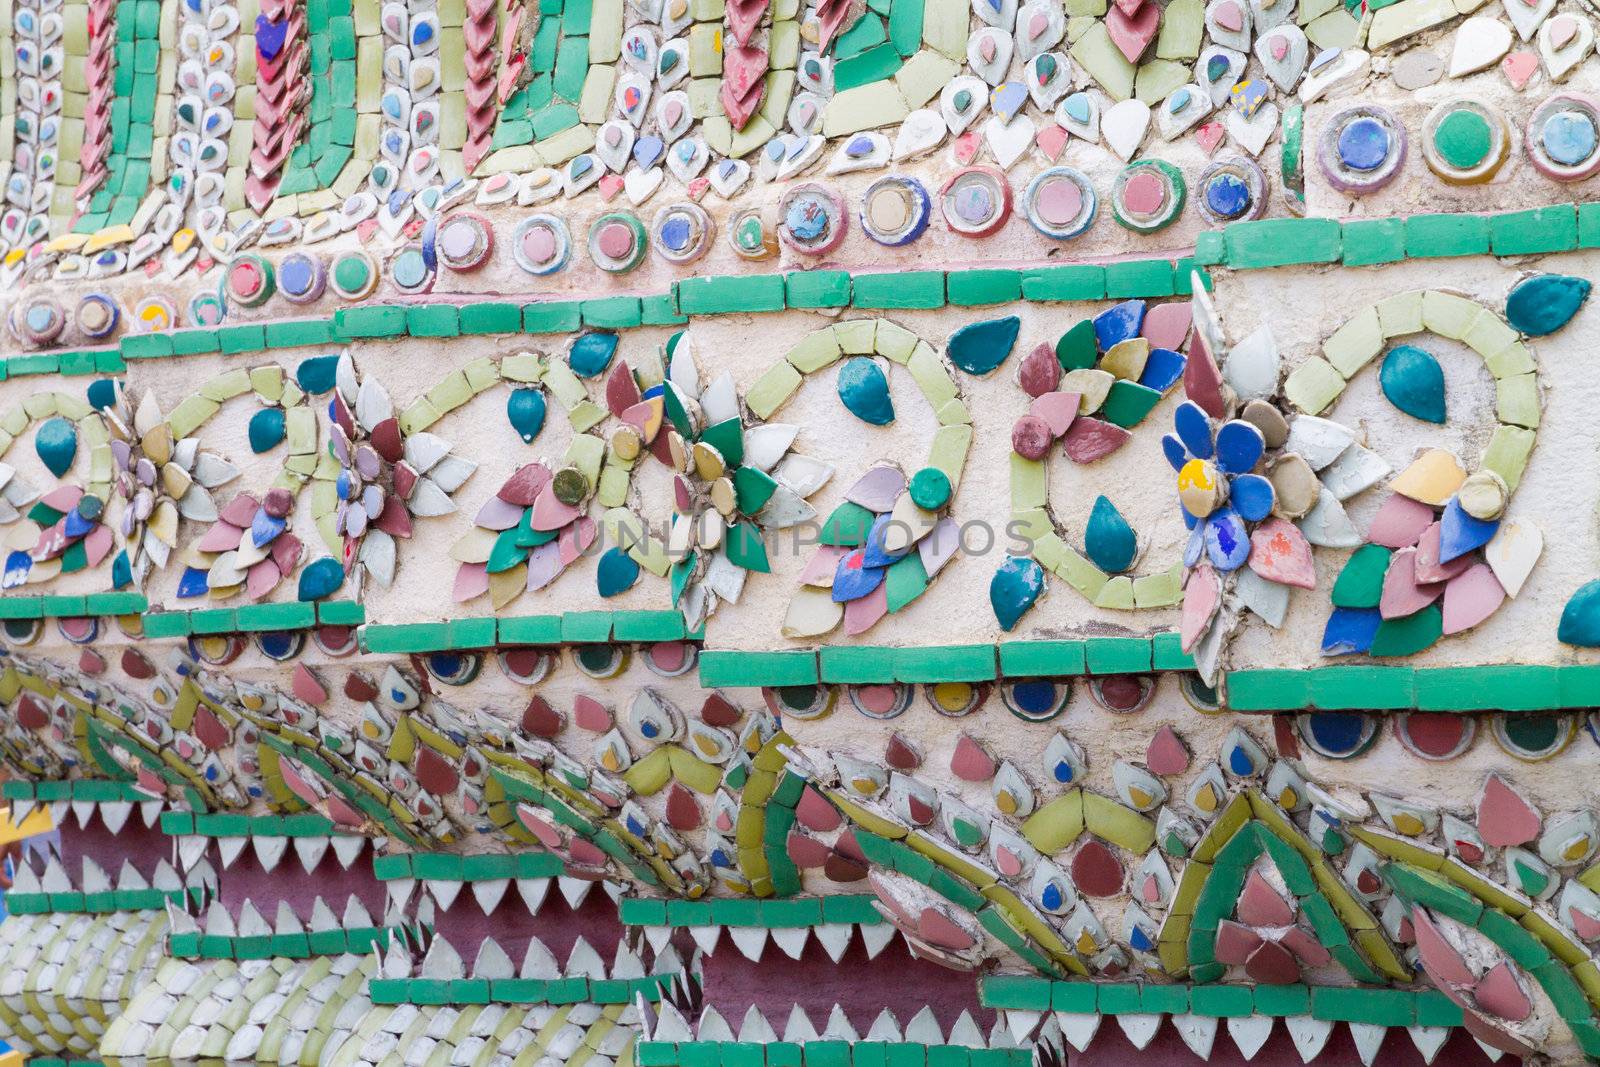 Building in Grand Palace finely decorated with mosaic tiles. Bangkok. Thailand.